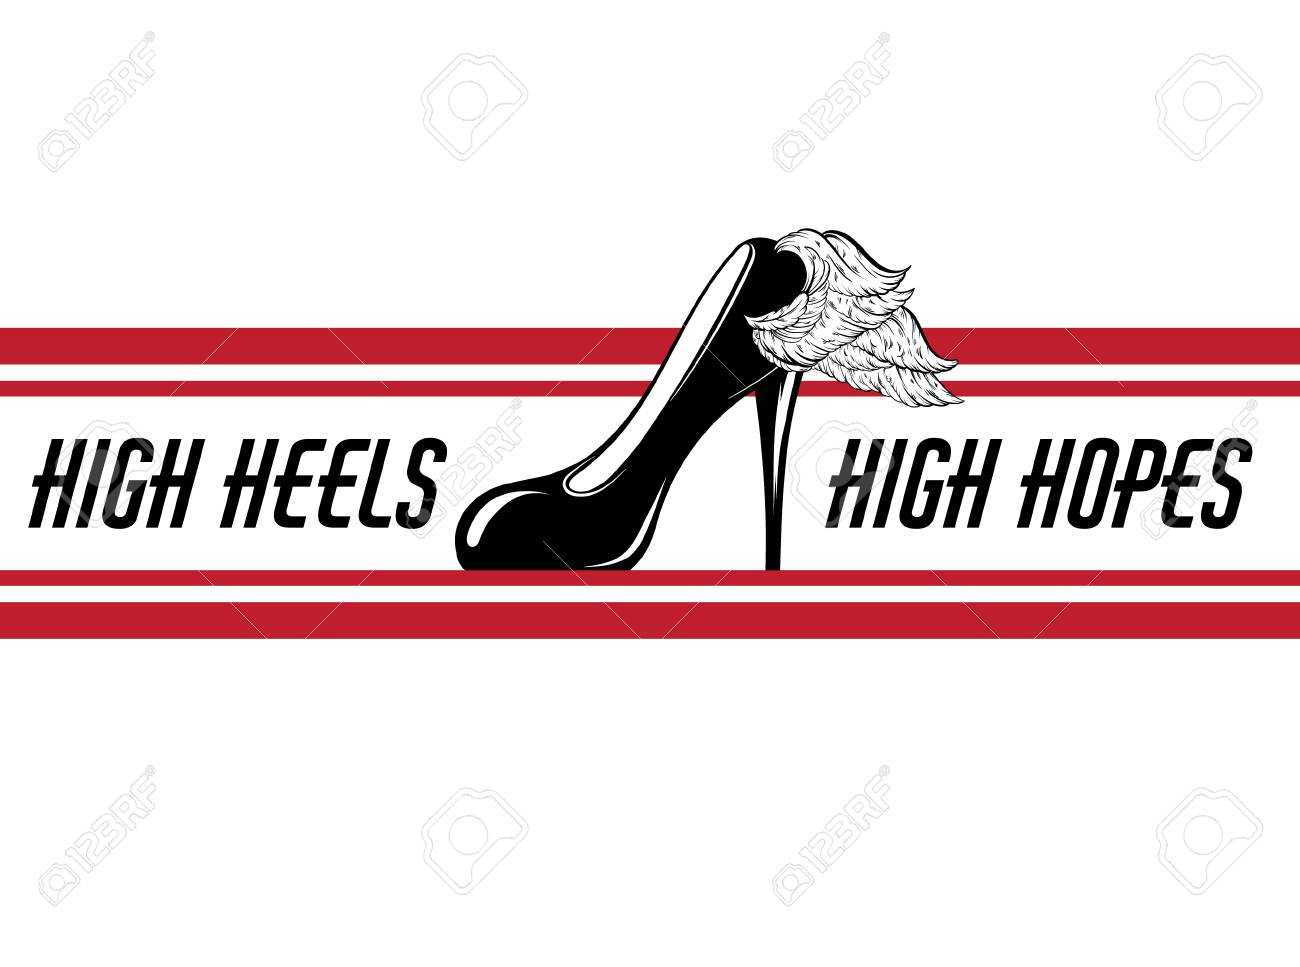 High Heels, High Hopes. Vector Hand Drawn Illustration Of Shoe.. For High Heel Template For Cards